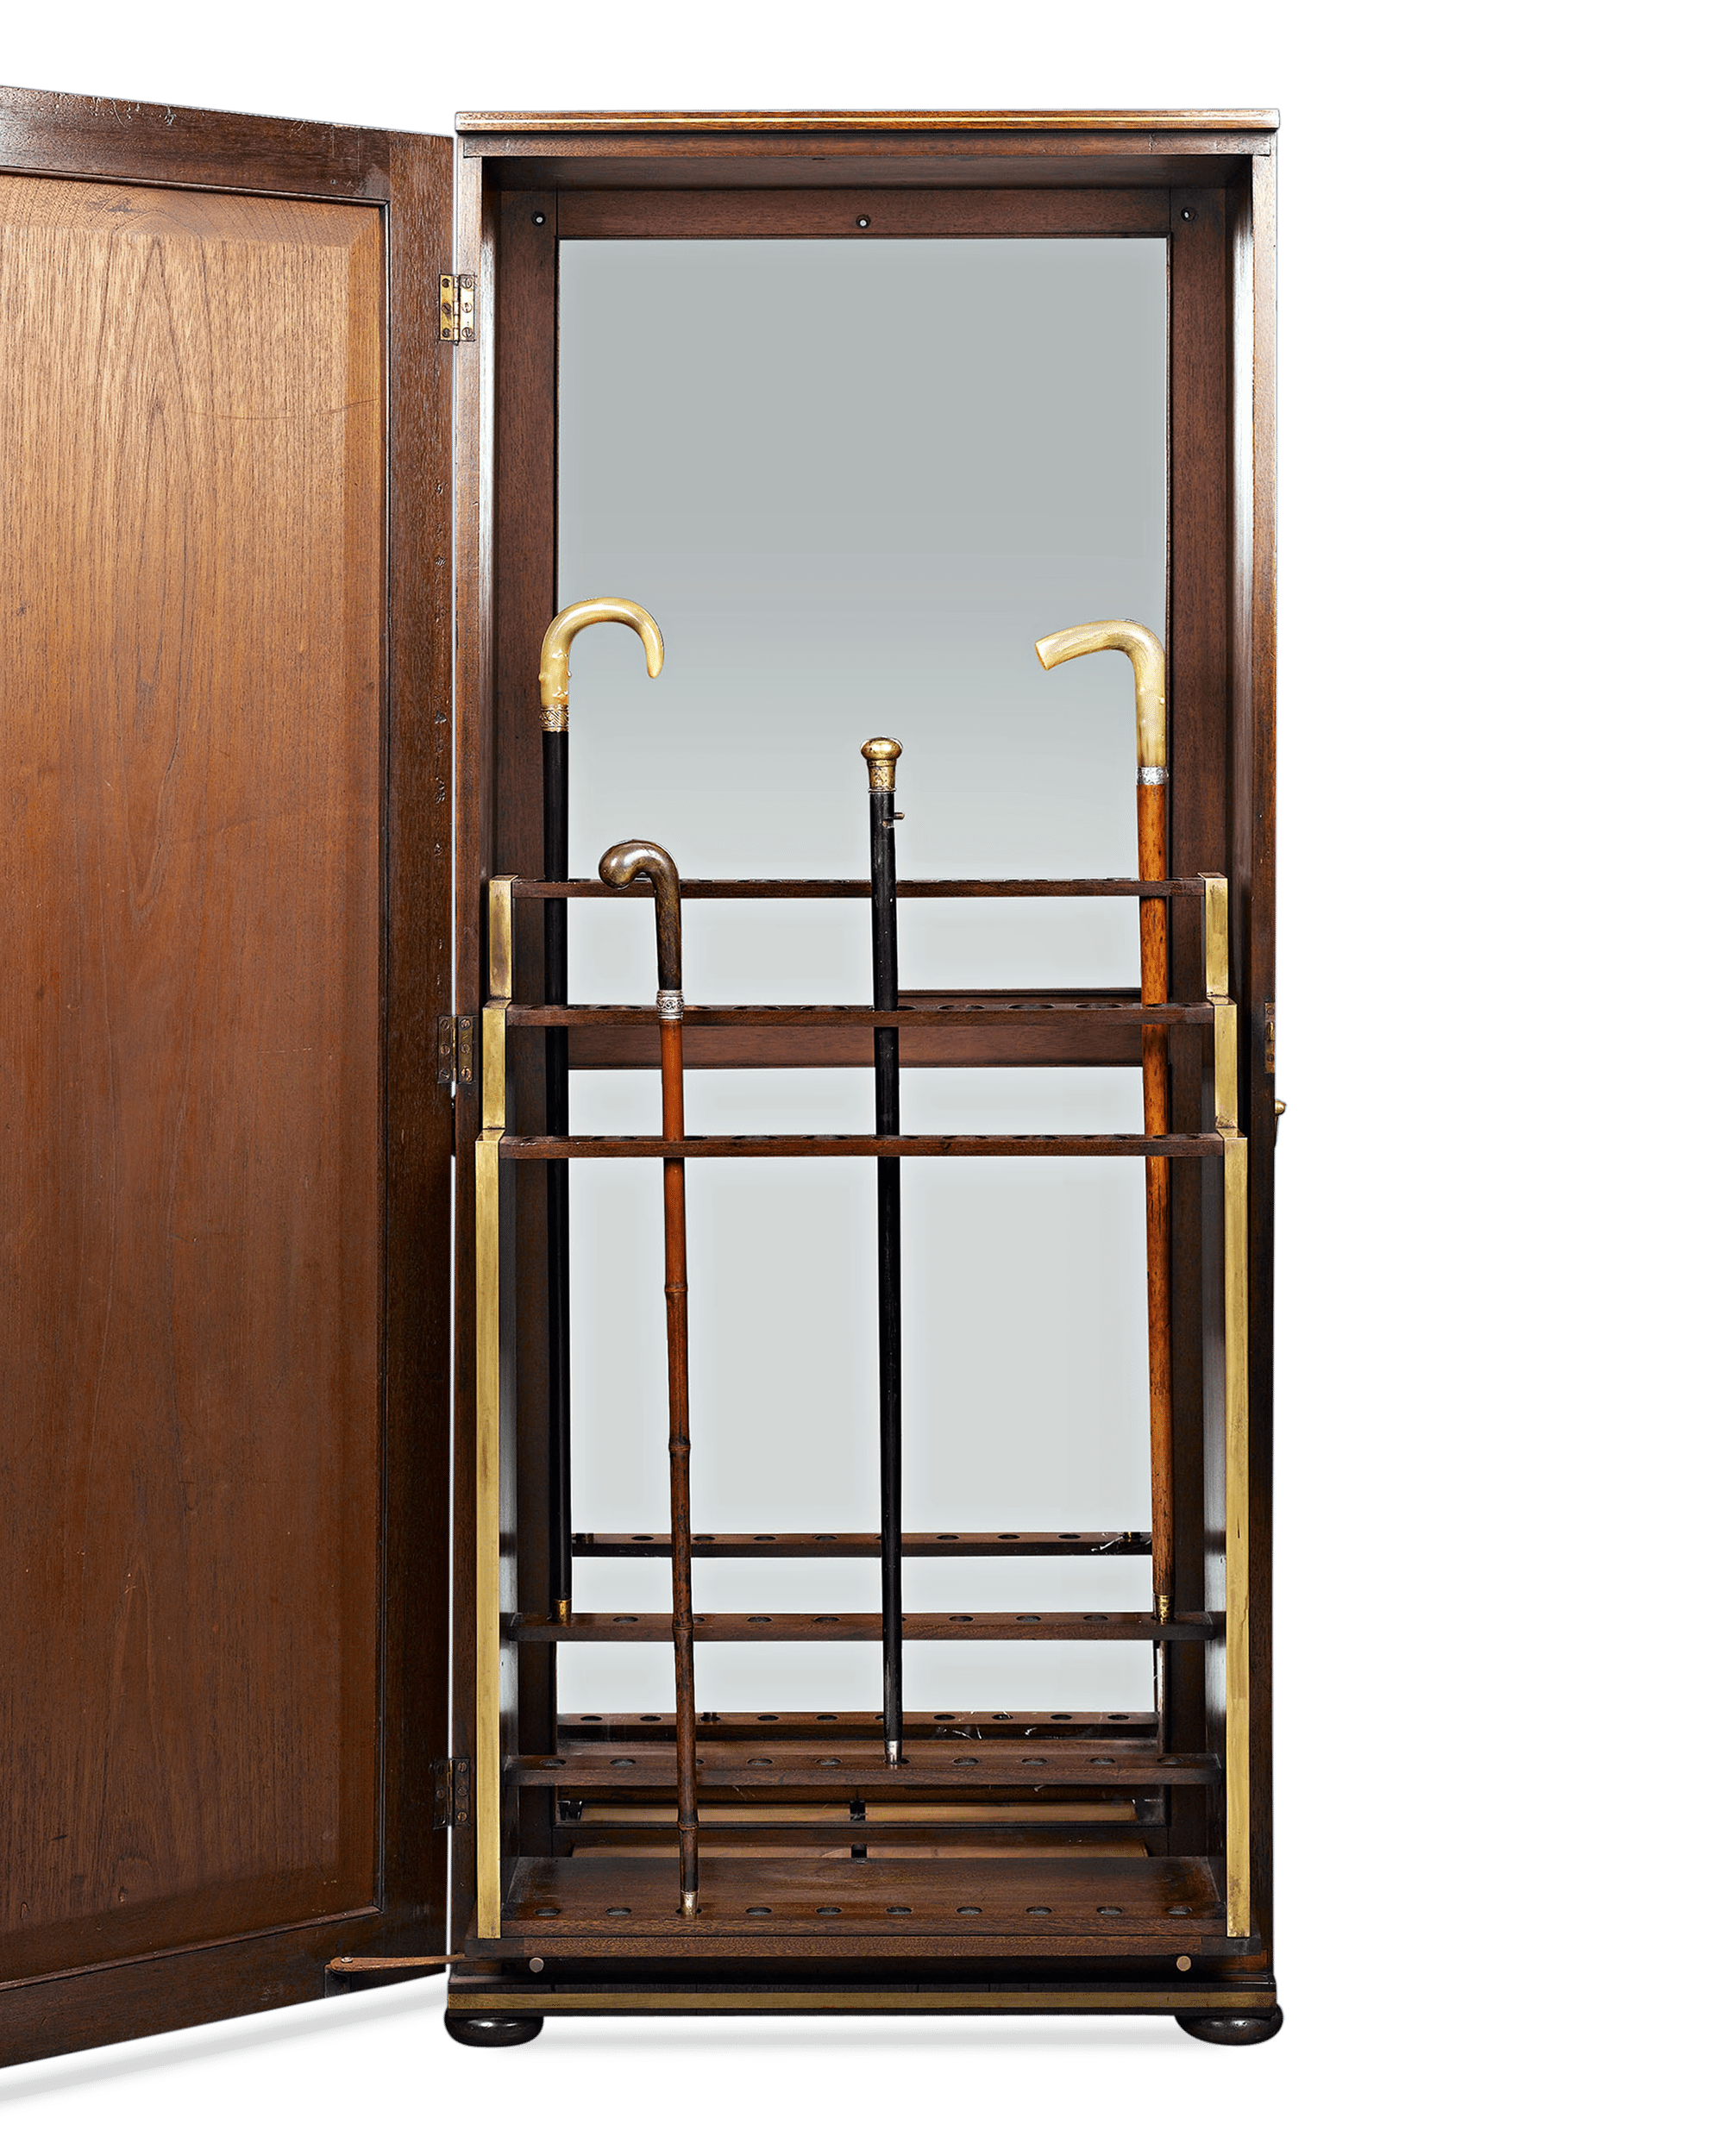 A full mirror ensures that each and every cane is visible